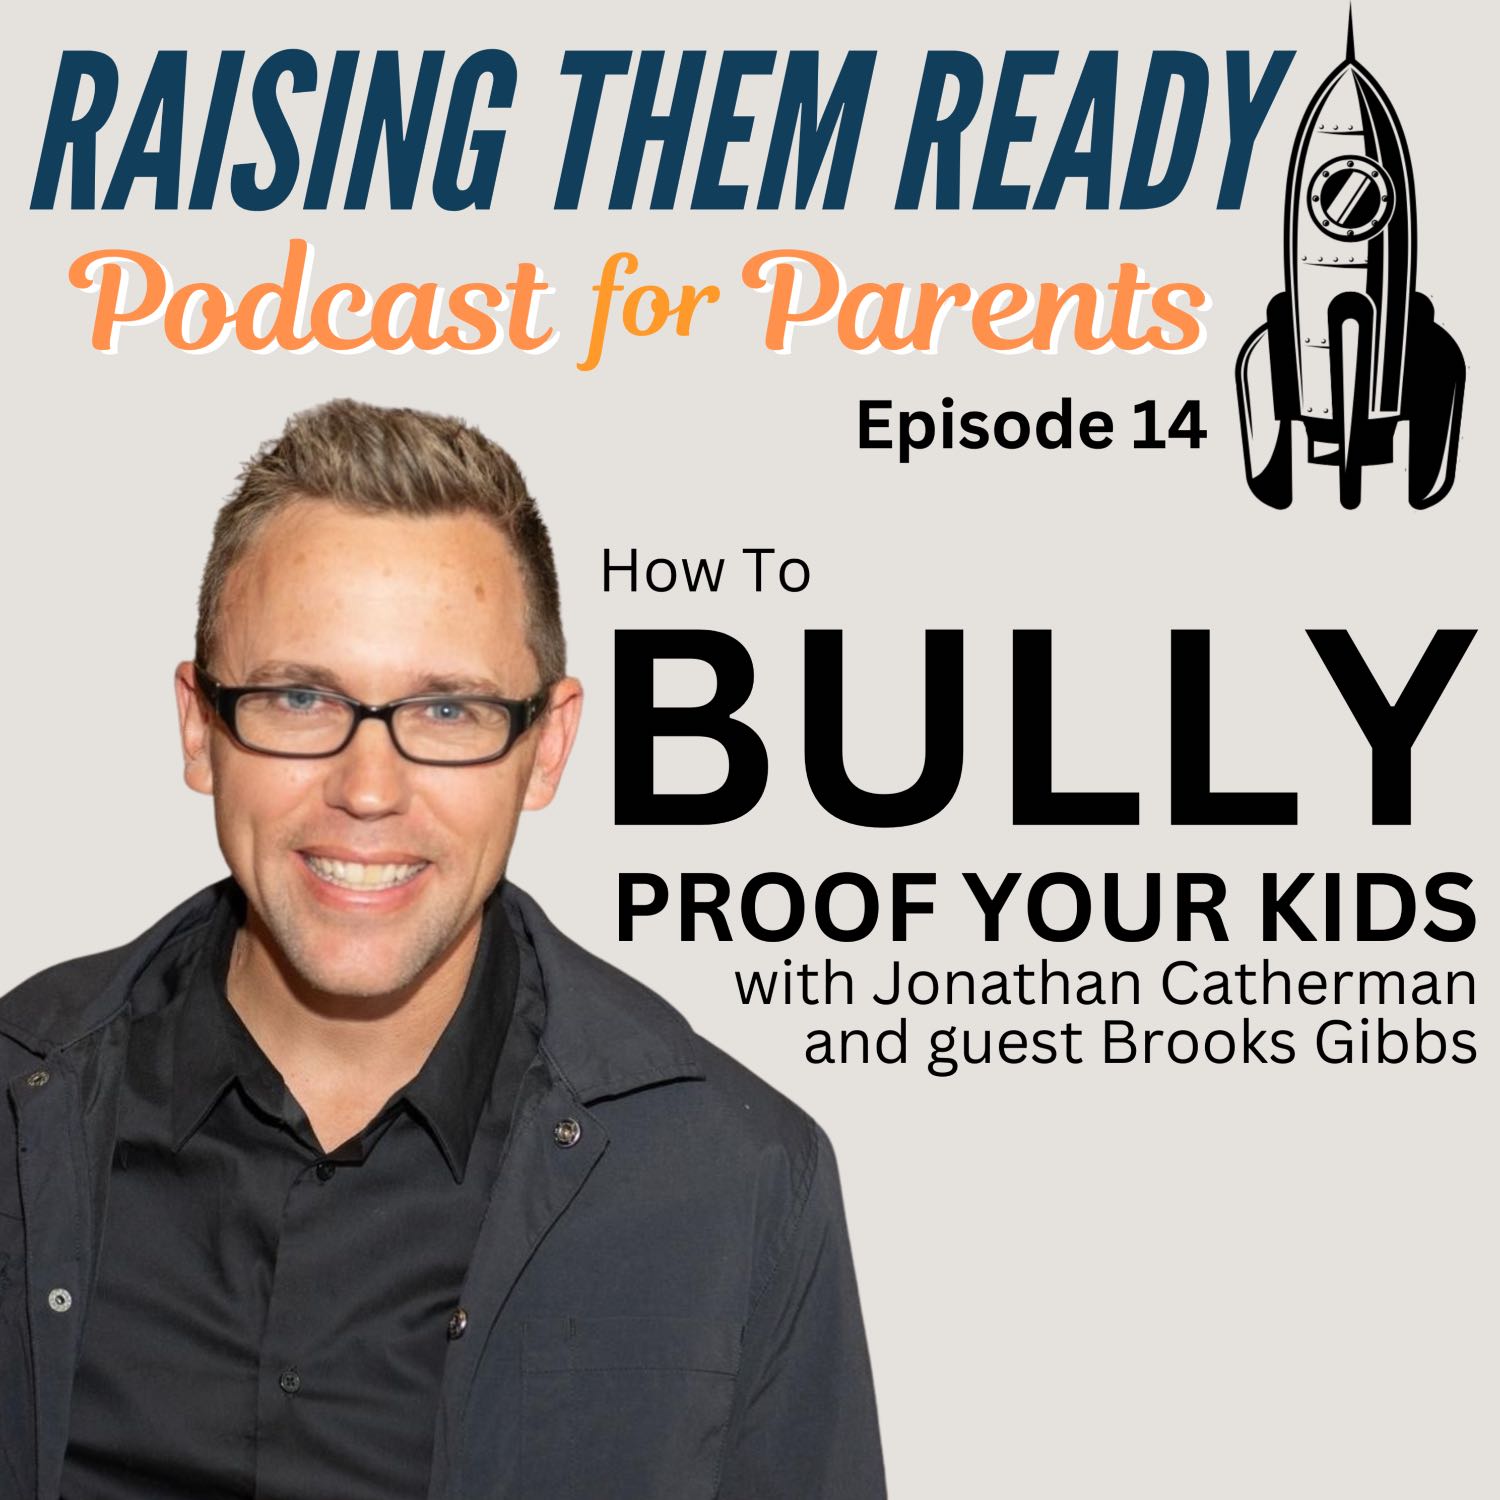 Bully Proof Your Kids, with guest Brooks Gibbs